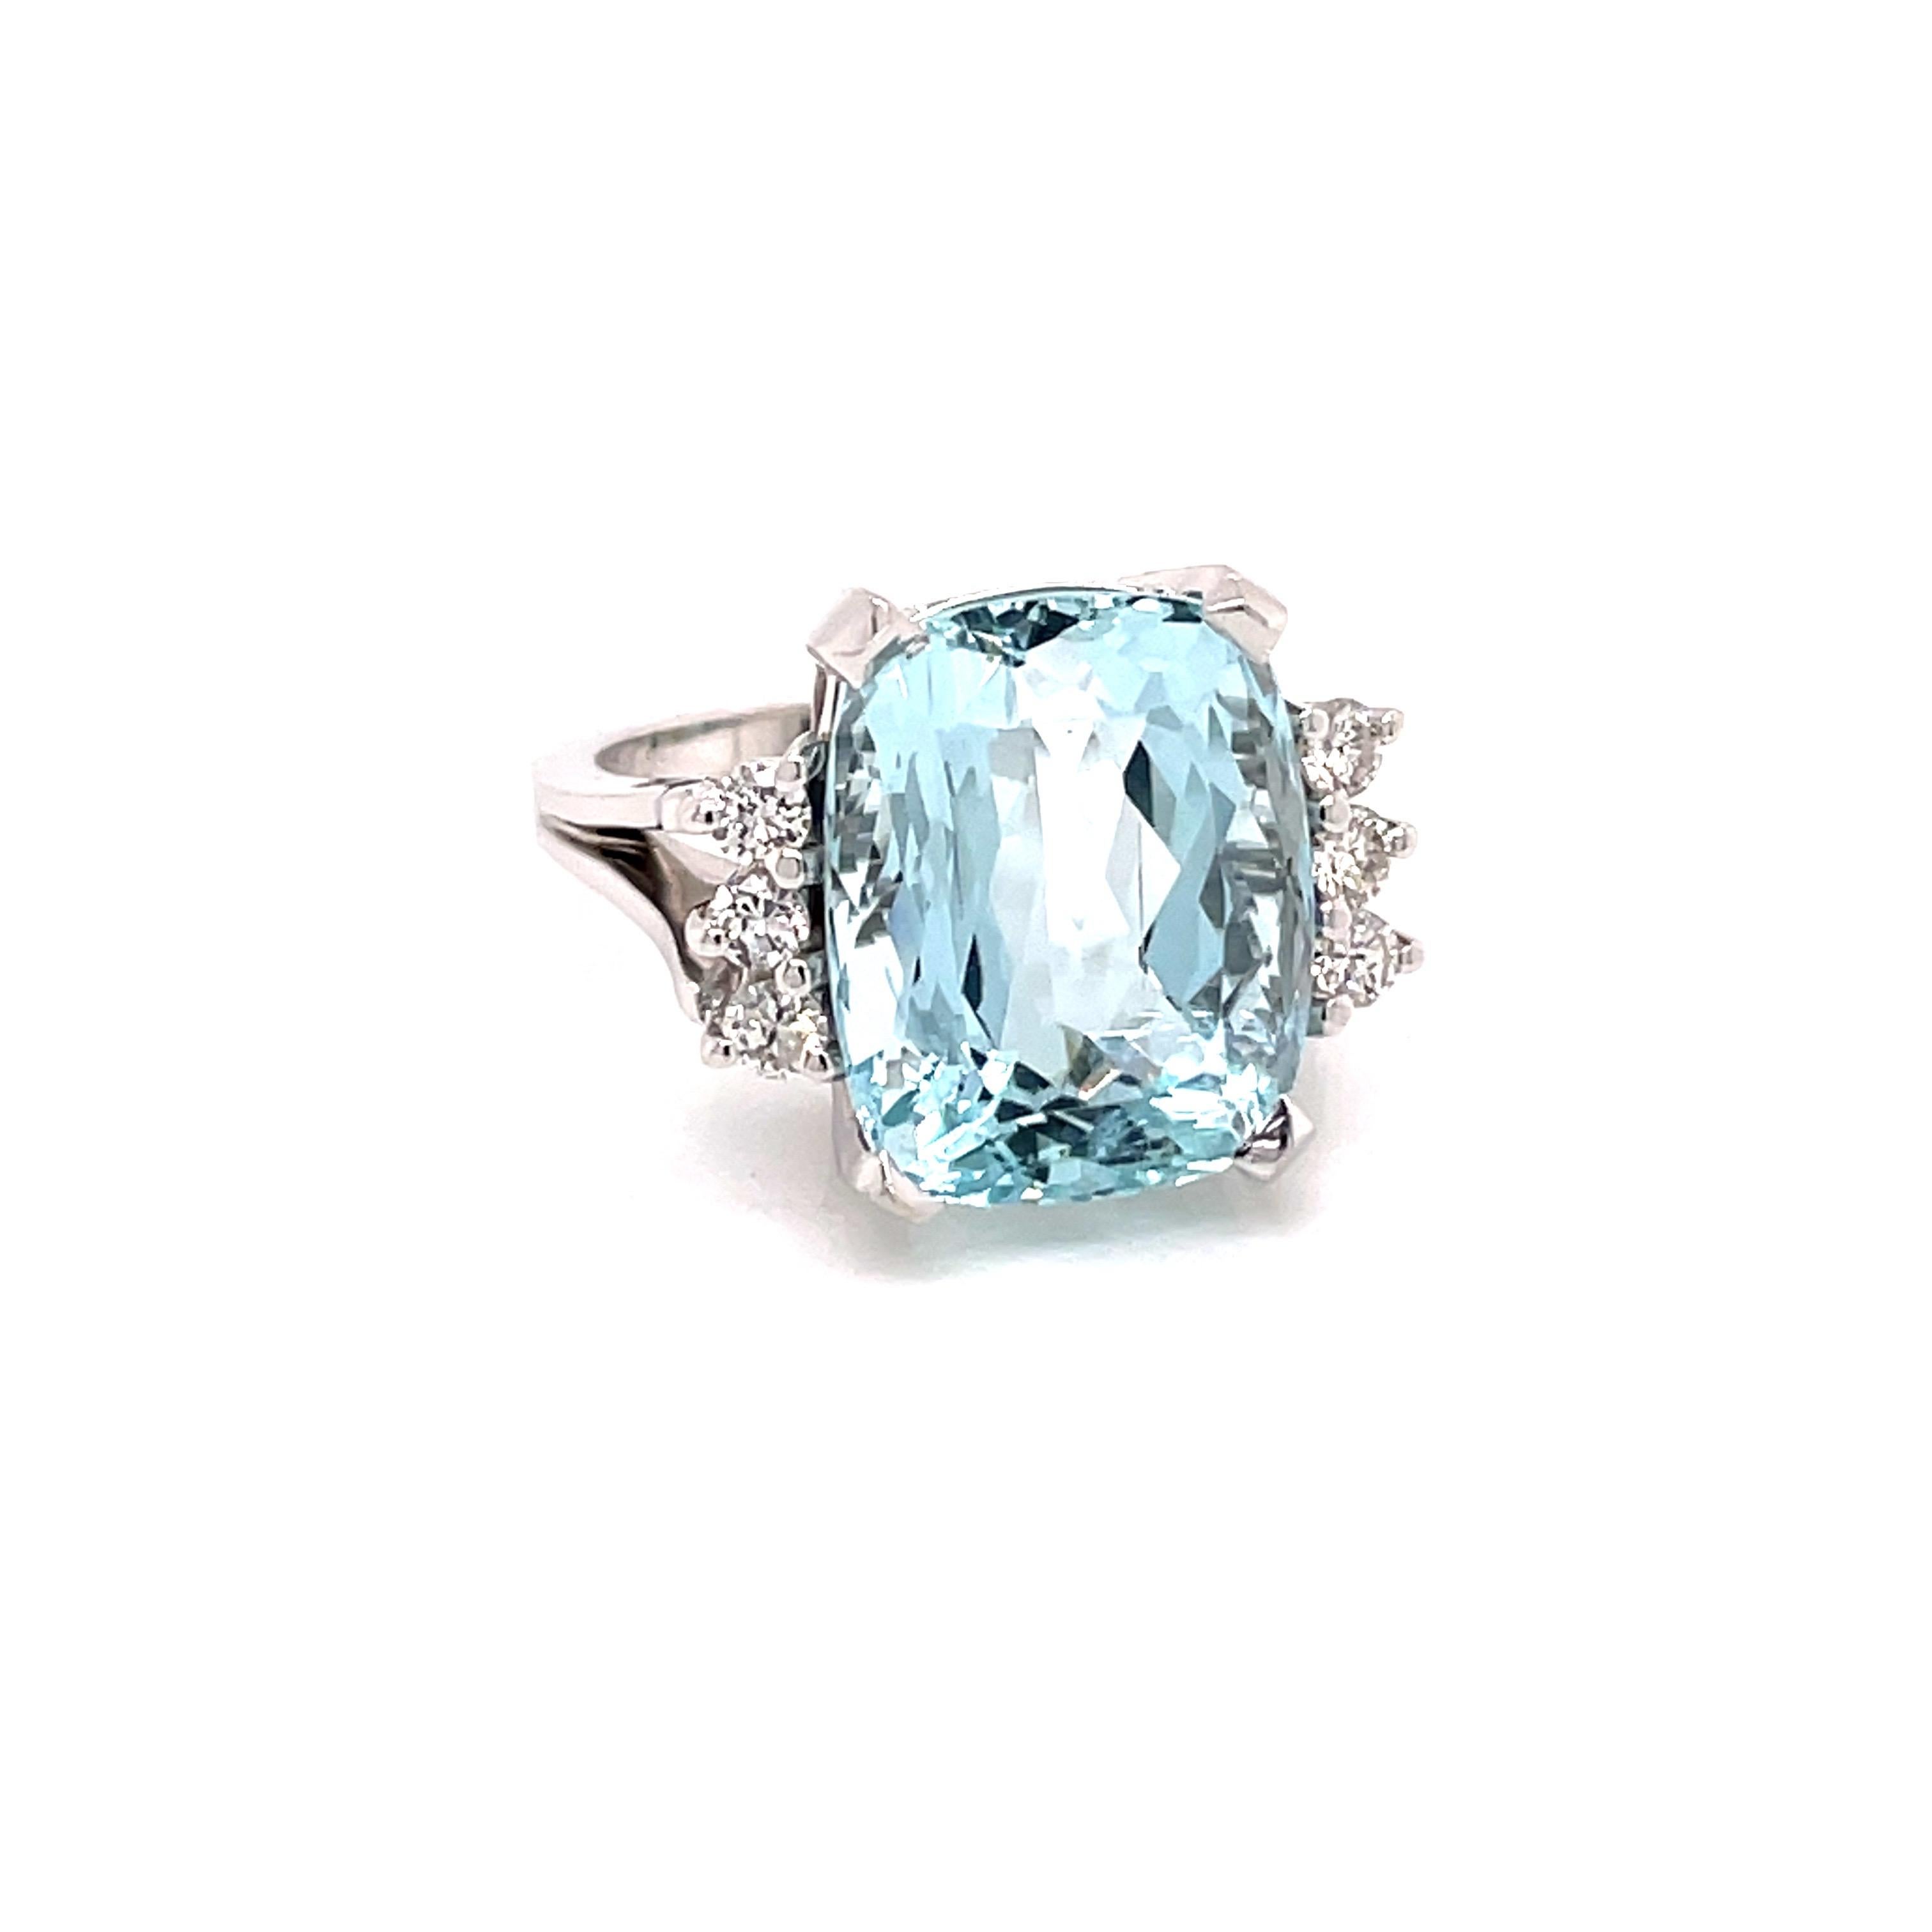 Vintage 1960's 10ct Cushion Cut Aquamarine Ring with Diamonds - The aquamarine weighs approximately 10ct and measures 14.4 x 11.7mm.  It is accented with 6 round brilliant diamonds weighing approximately .36ct G - H color and VS2 - SI1 clarity.  